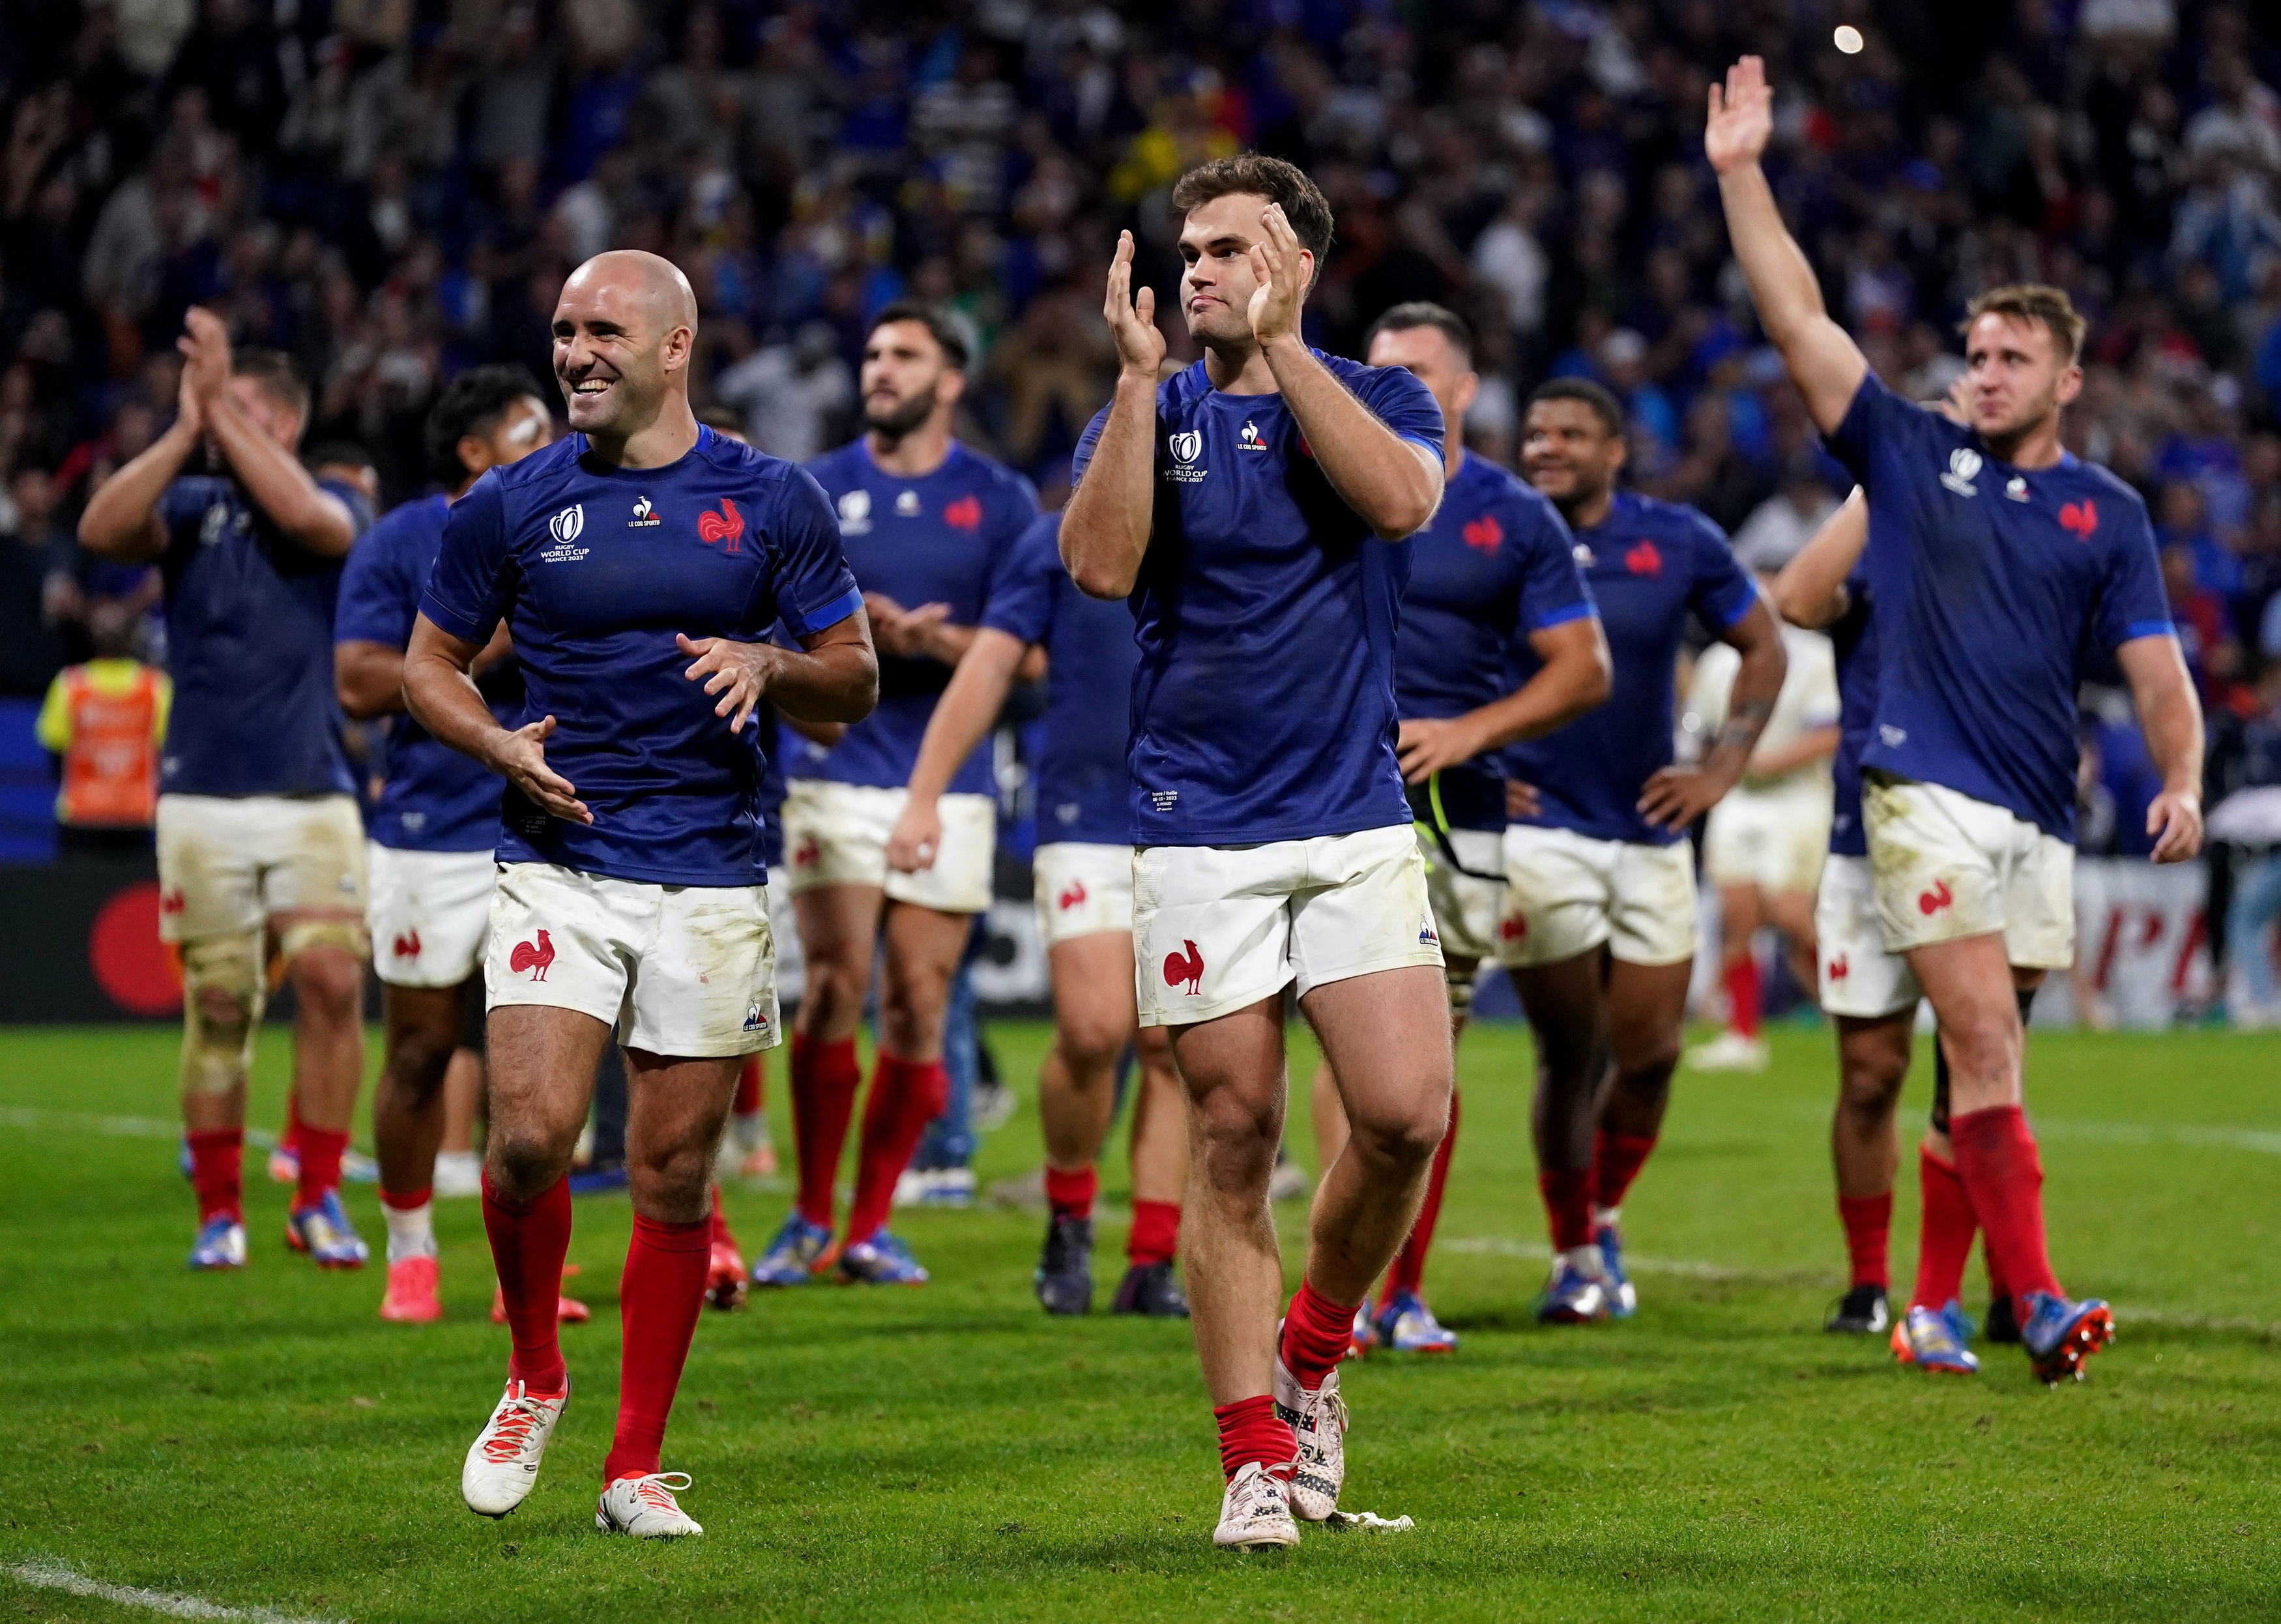 France recorded their biggest ever victory over Italy